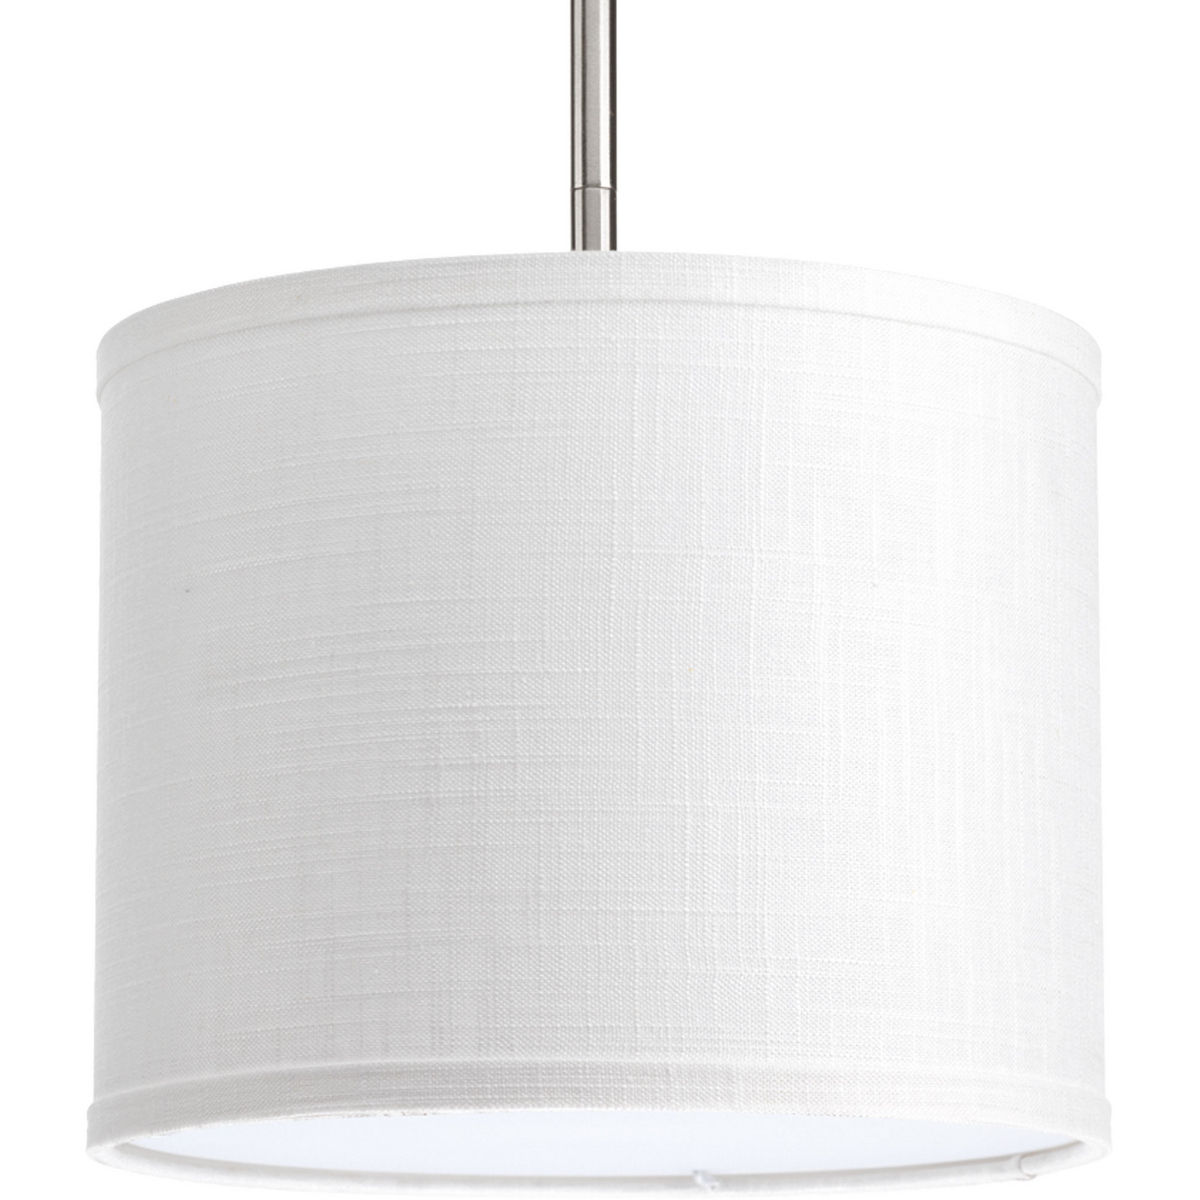 The Markor Series is a modular pendant system. The versatile series allow the choice of shades and stem kits. This 10 in shade with summer linen fabric is inspired by mid-century design. Acrylic bottom diffuser. This shade can be used with a variety of stem kits in CFL, LED and incandescent light sources. (Cannot be used with 3-light pendant kits.).